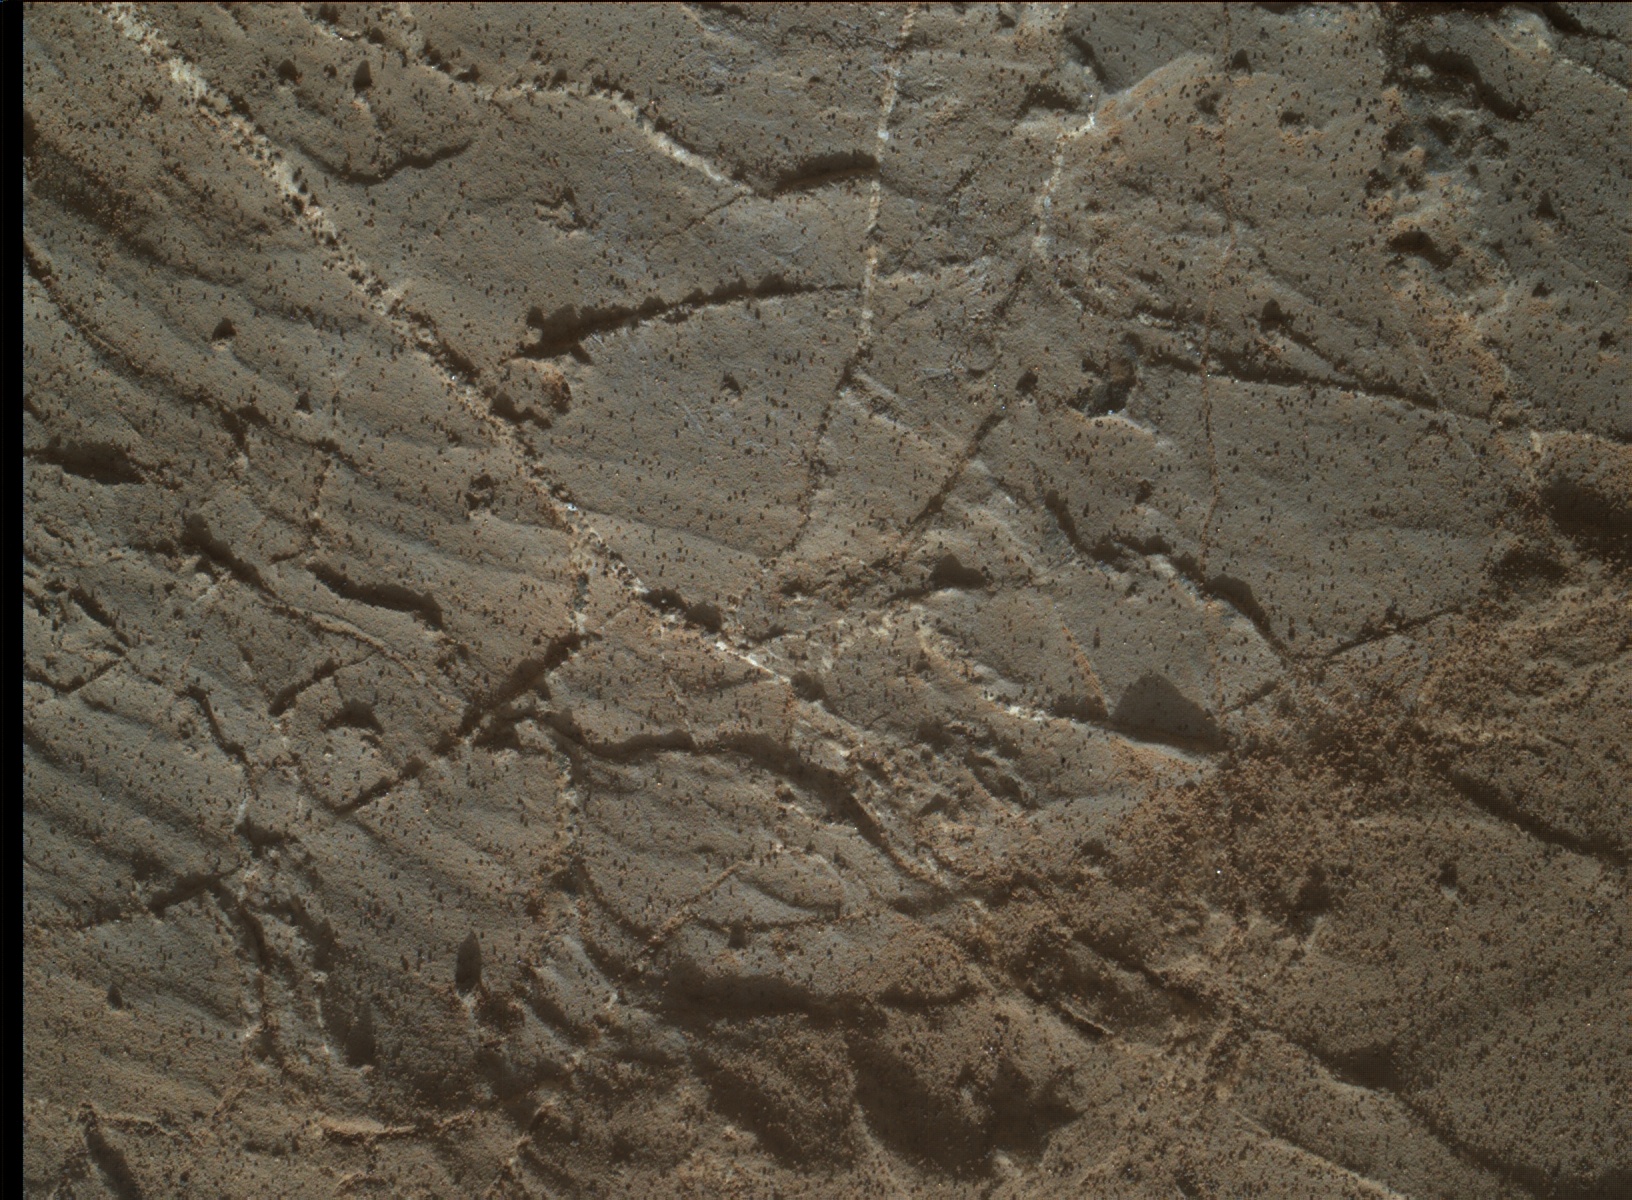 Nasa's Mars rover Curiosity acquired this image using its Mars Hand Lens Imager (MAHLI) on Sol 1972